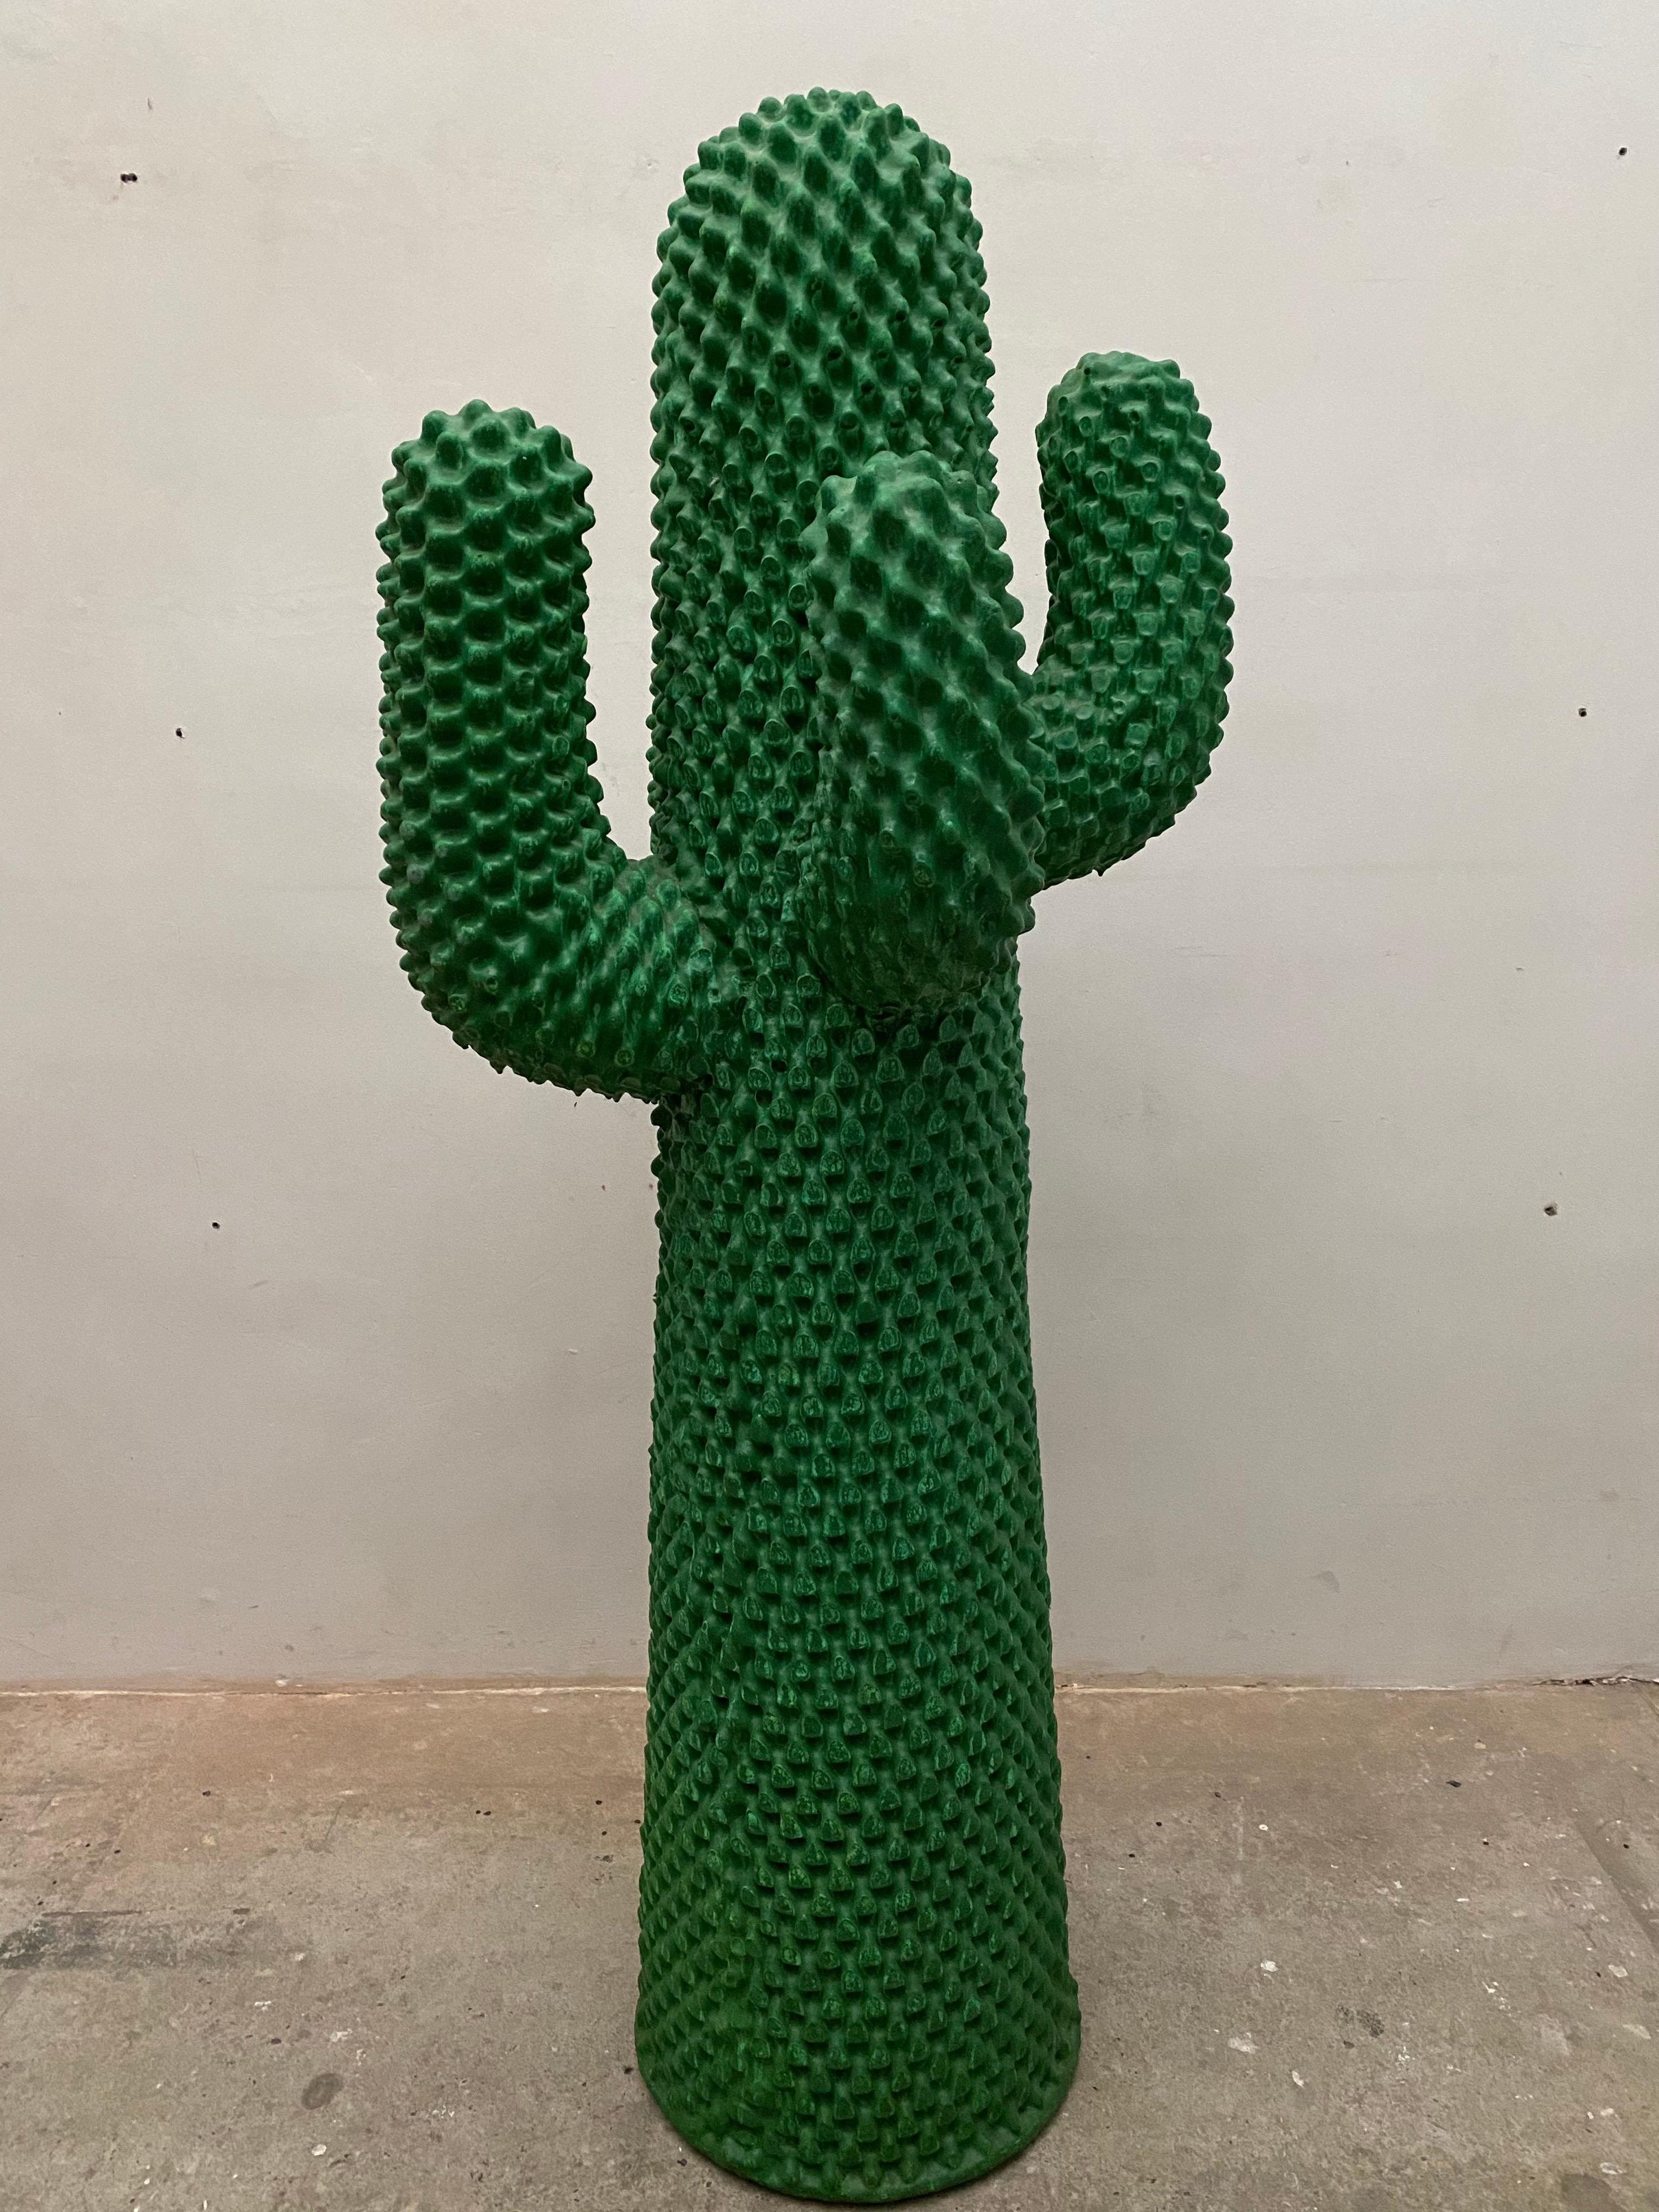 Vintage original, Pop-Art four-armed coat ‘Cactus' stand, produced in 1986 as number 487 /2000 designed by Guido Drocco & Franco Mello for GUFRAM in soft polyurethane, finished by hand in the original emerald green Guflac. In a very good original